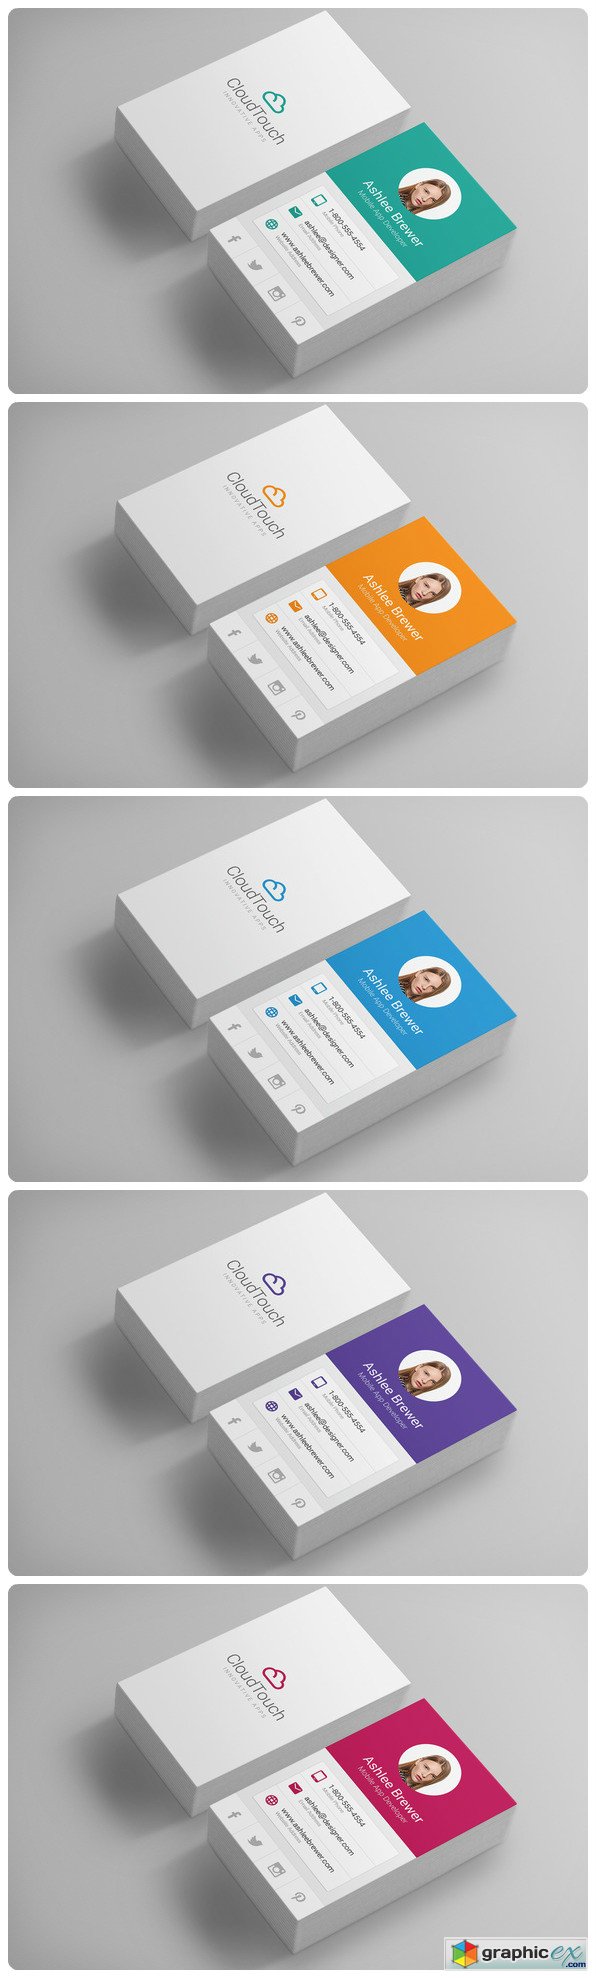 Material Design Business Cards 703967